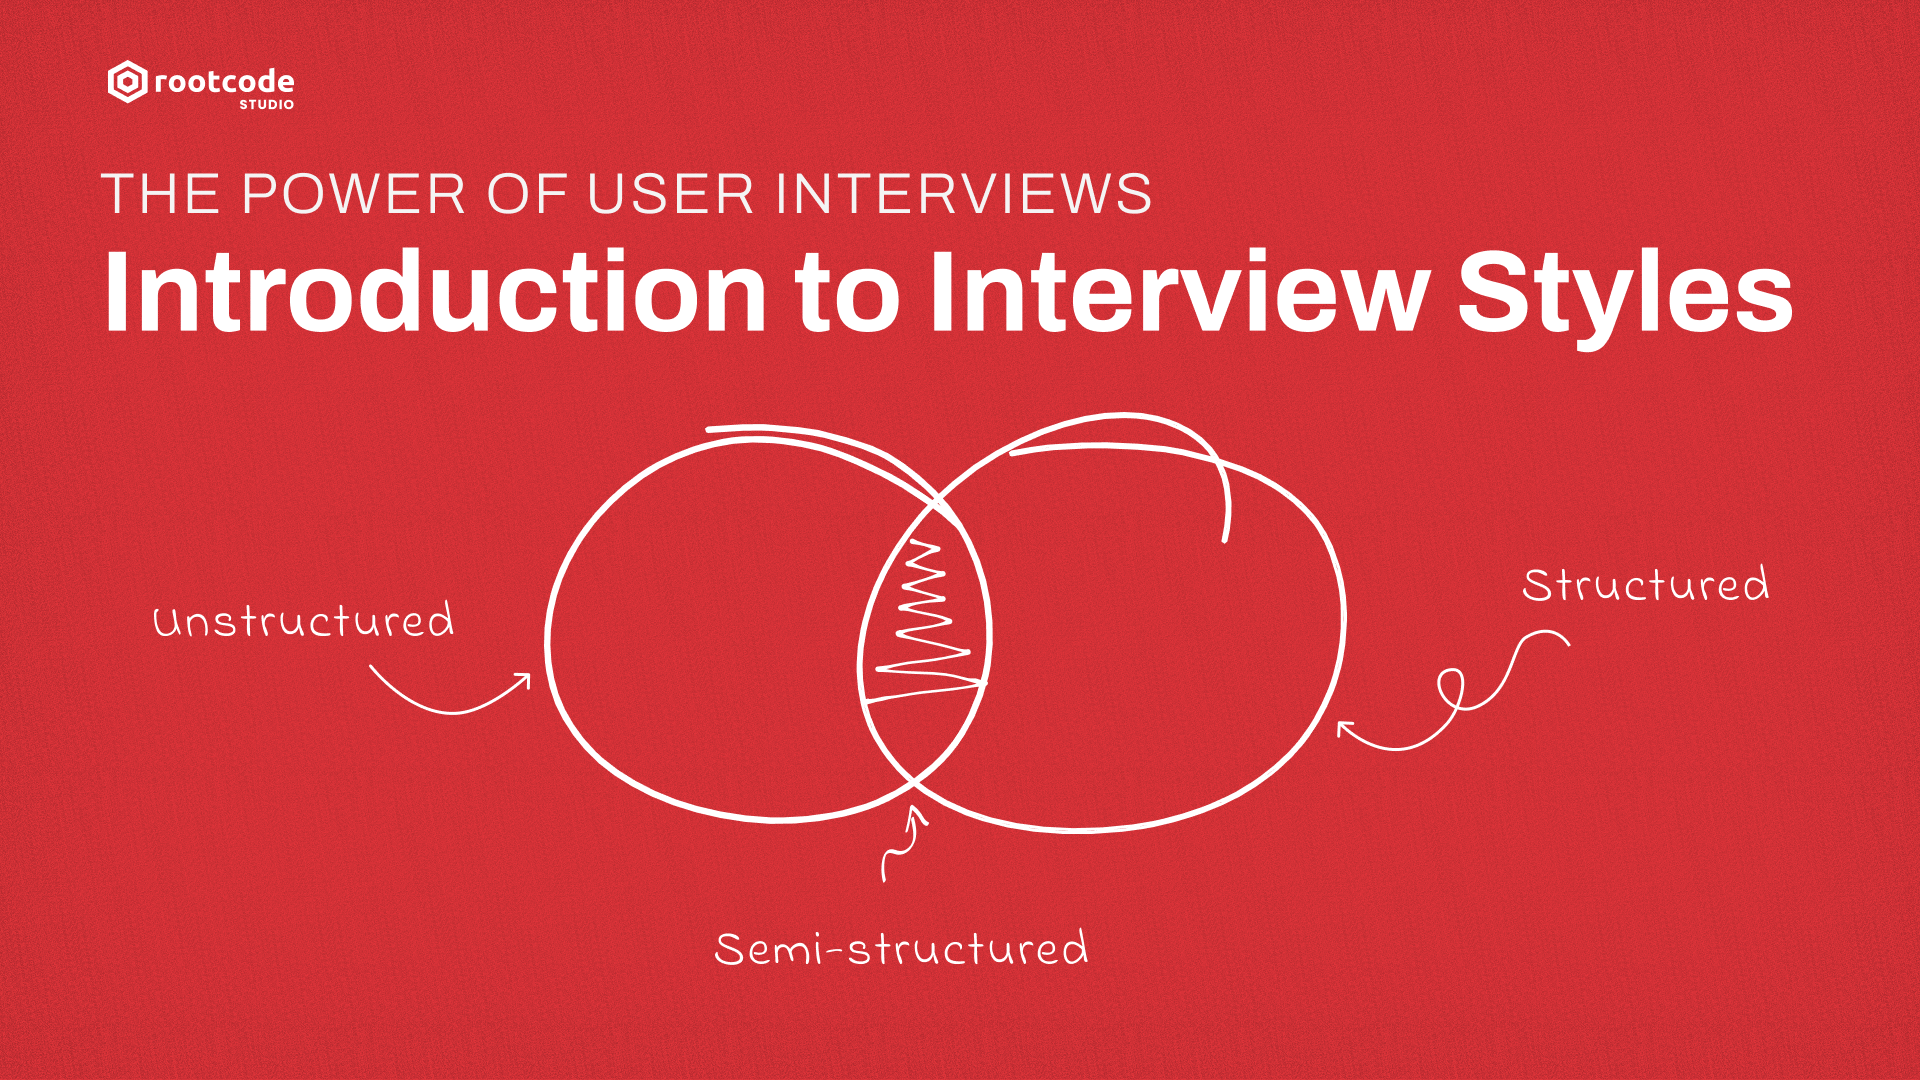 The Power of User Interviews: Introduction to Interview Styles